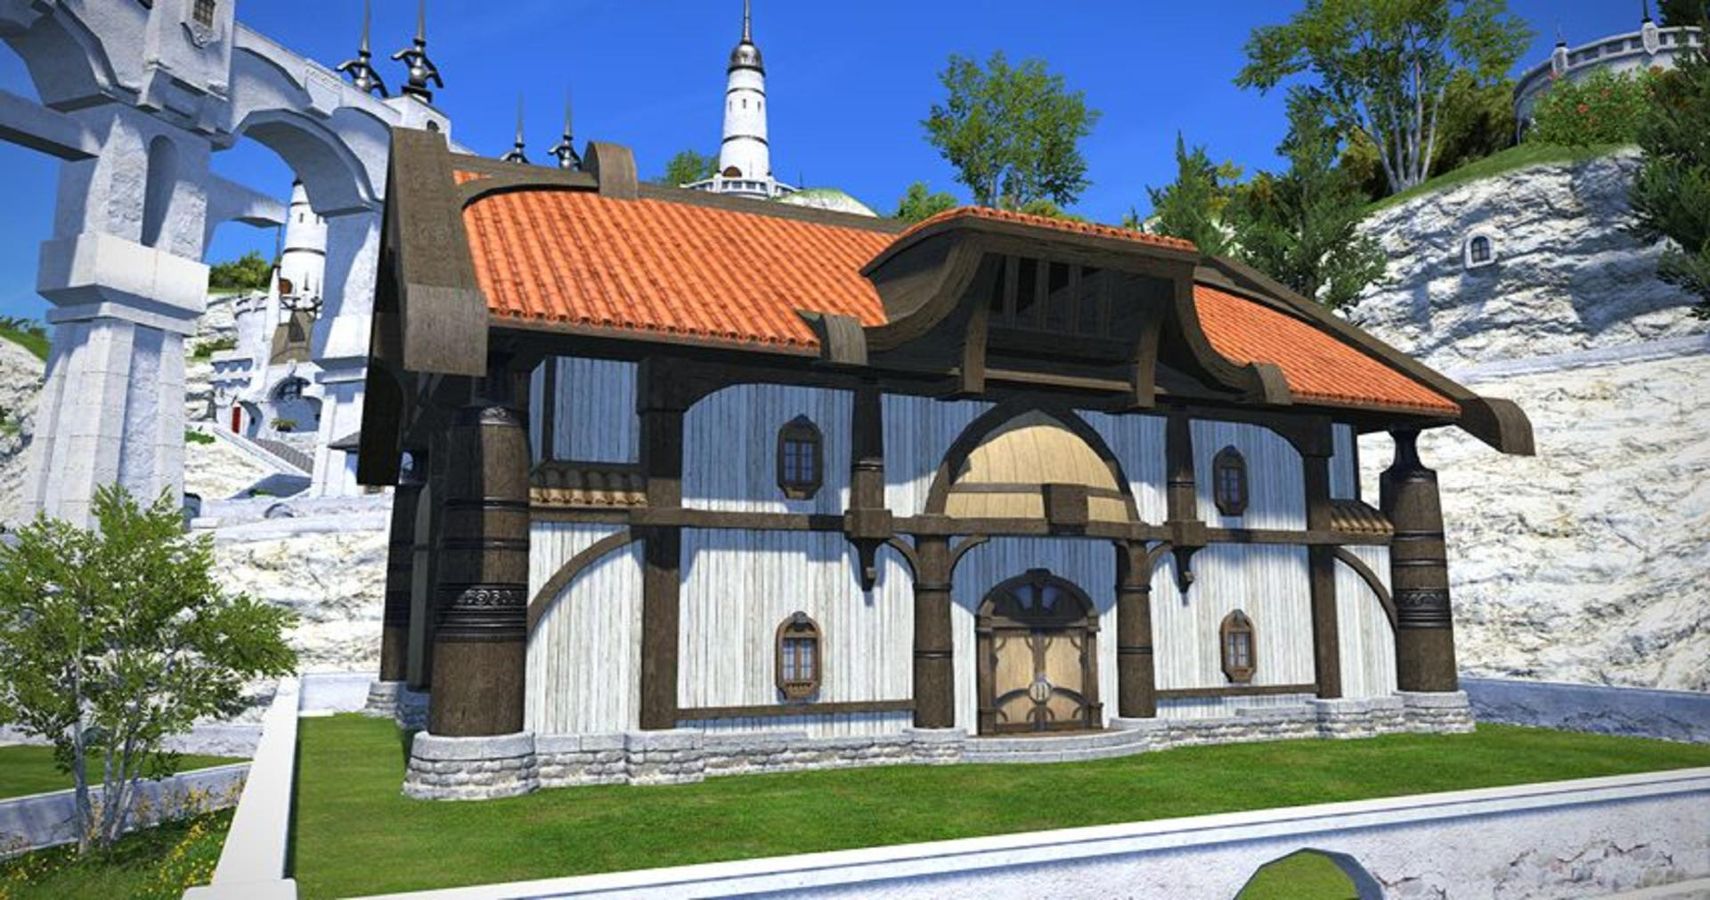 FFXIV will soon resume automatic demolition of housing